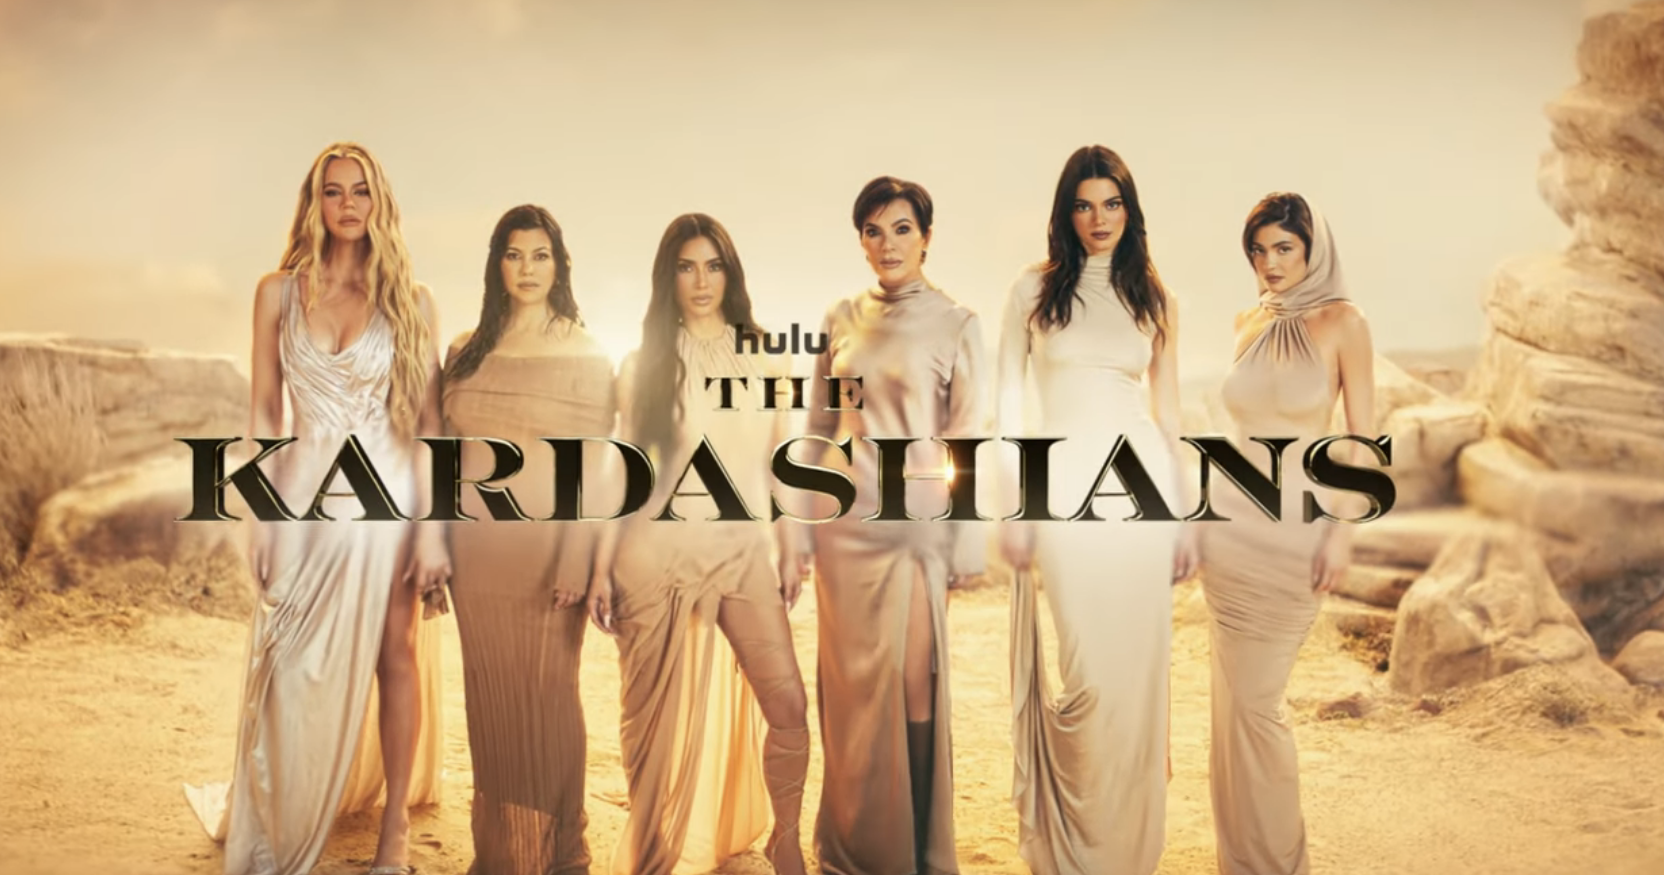 The Kardashian family standing together in a promotional image for their show on Hulu